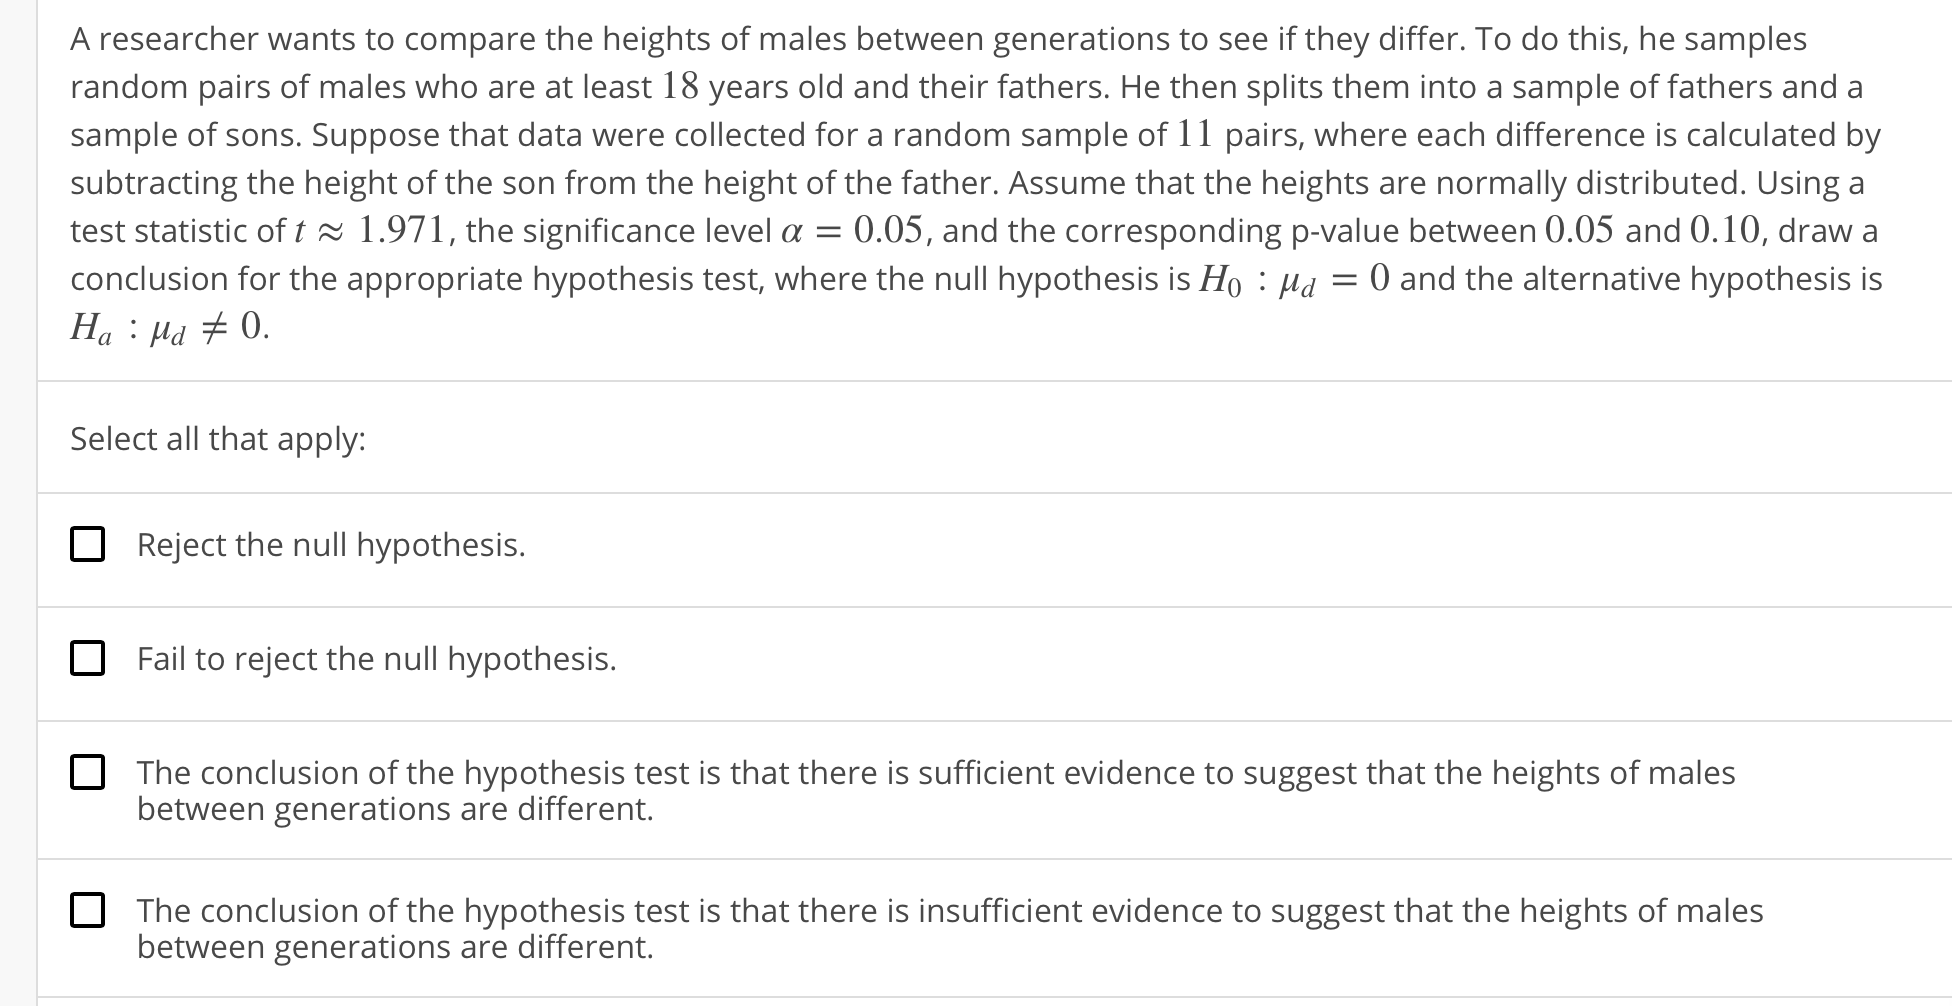 A researcher wants to compare the heights of males between generations to see if they differ. To do this, he samples
random pairs of males who are at least 18 years old and their fathers. He then splits them into a sample of fathers and a
sample of sons. Suppose that data were collected for a random sample of 11 pairs, where each difference is calculated by
subtracting the height of the son from the height of the father. Assume that the heights are normally distributed. Using a
test statistic of ț ~. 1 .971 , the significance level α-0.05, and the corresponding p-value between 0.05 and O. 10, draw a
conclusion for the appropriate hypothesis test, where the null hypothesis is Ho·Ha-0 and the alternative hypothesis is
Select all that apply:
Reject the null hypothesis.
Fail to reject the null hypothesis.
The conclusion of the hypothesis test is that there is sufficient evidence to suggest that the heights of males
between generations are different.
The conclusion of the hypothesis test is that there is insufficient evidence to suggest that the heights of males
between generations are different.
